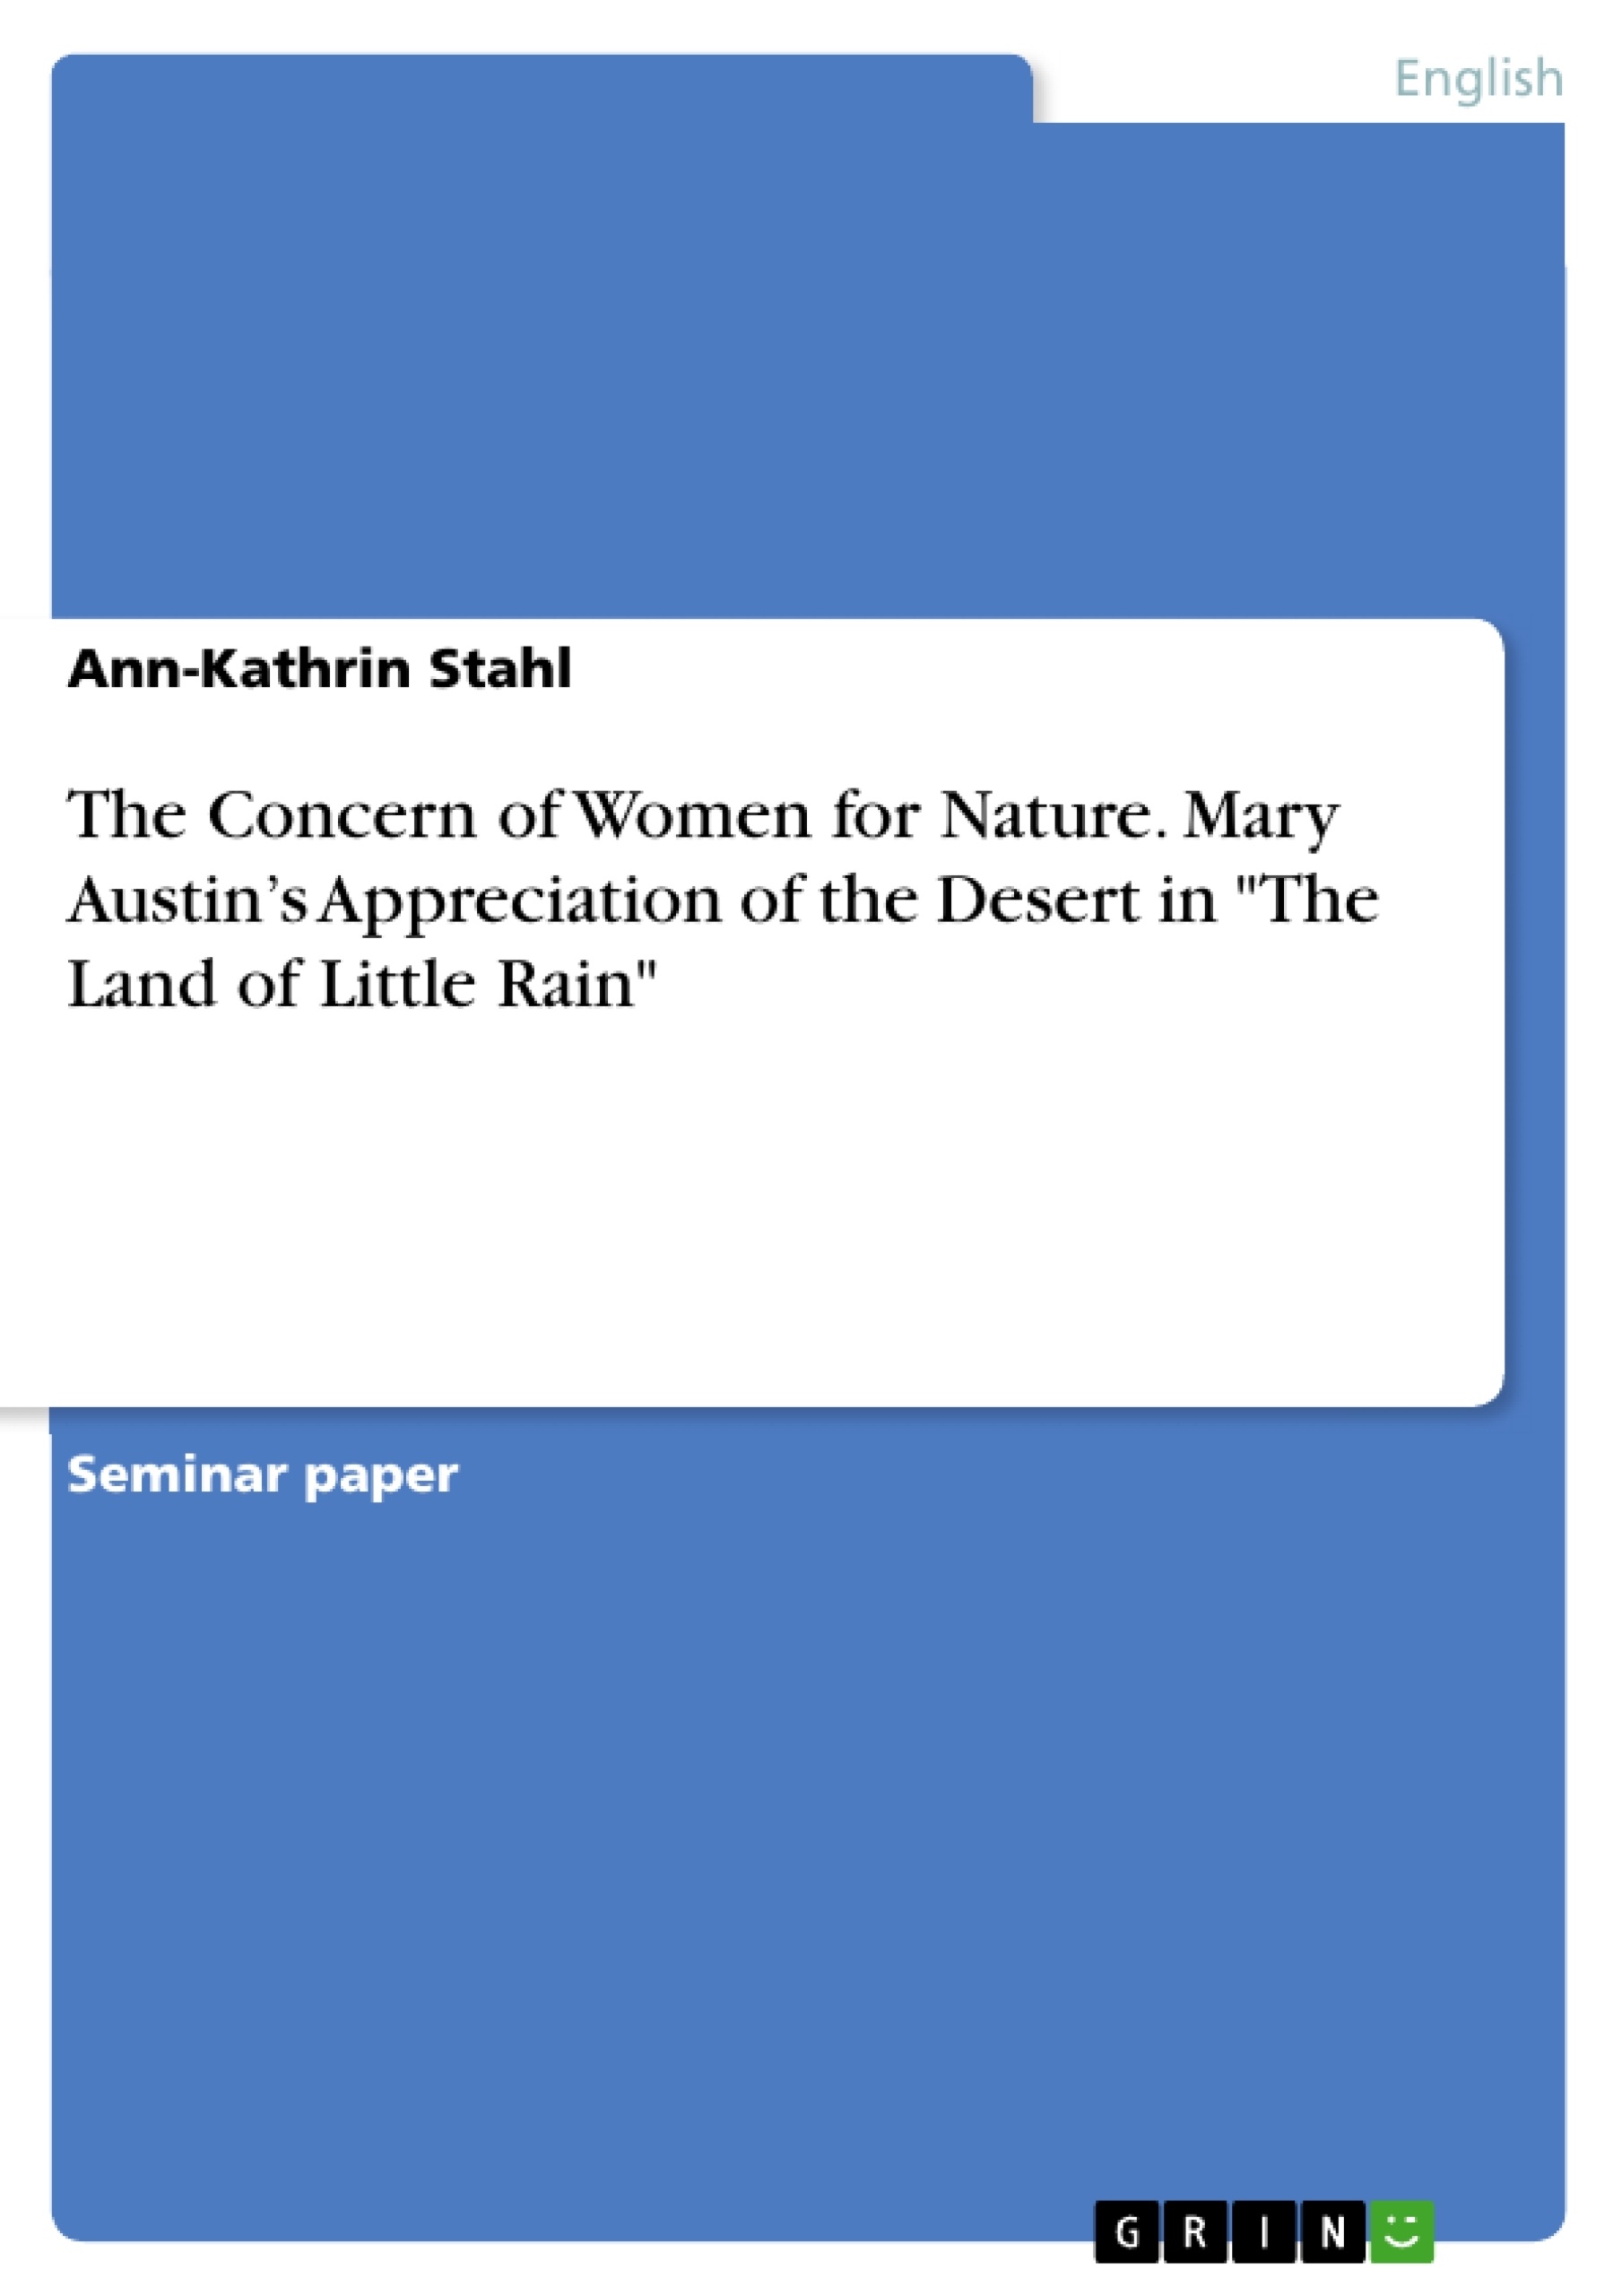 Titel: The Concern of Women for Nature. Mary Austin’s Appreciation of the Desert in "The Land of Little Rain"